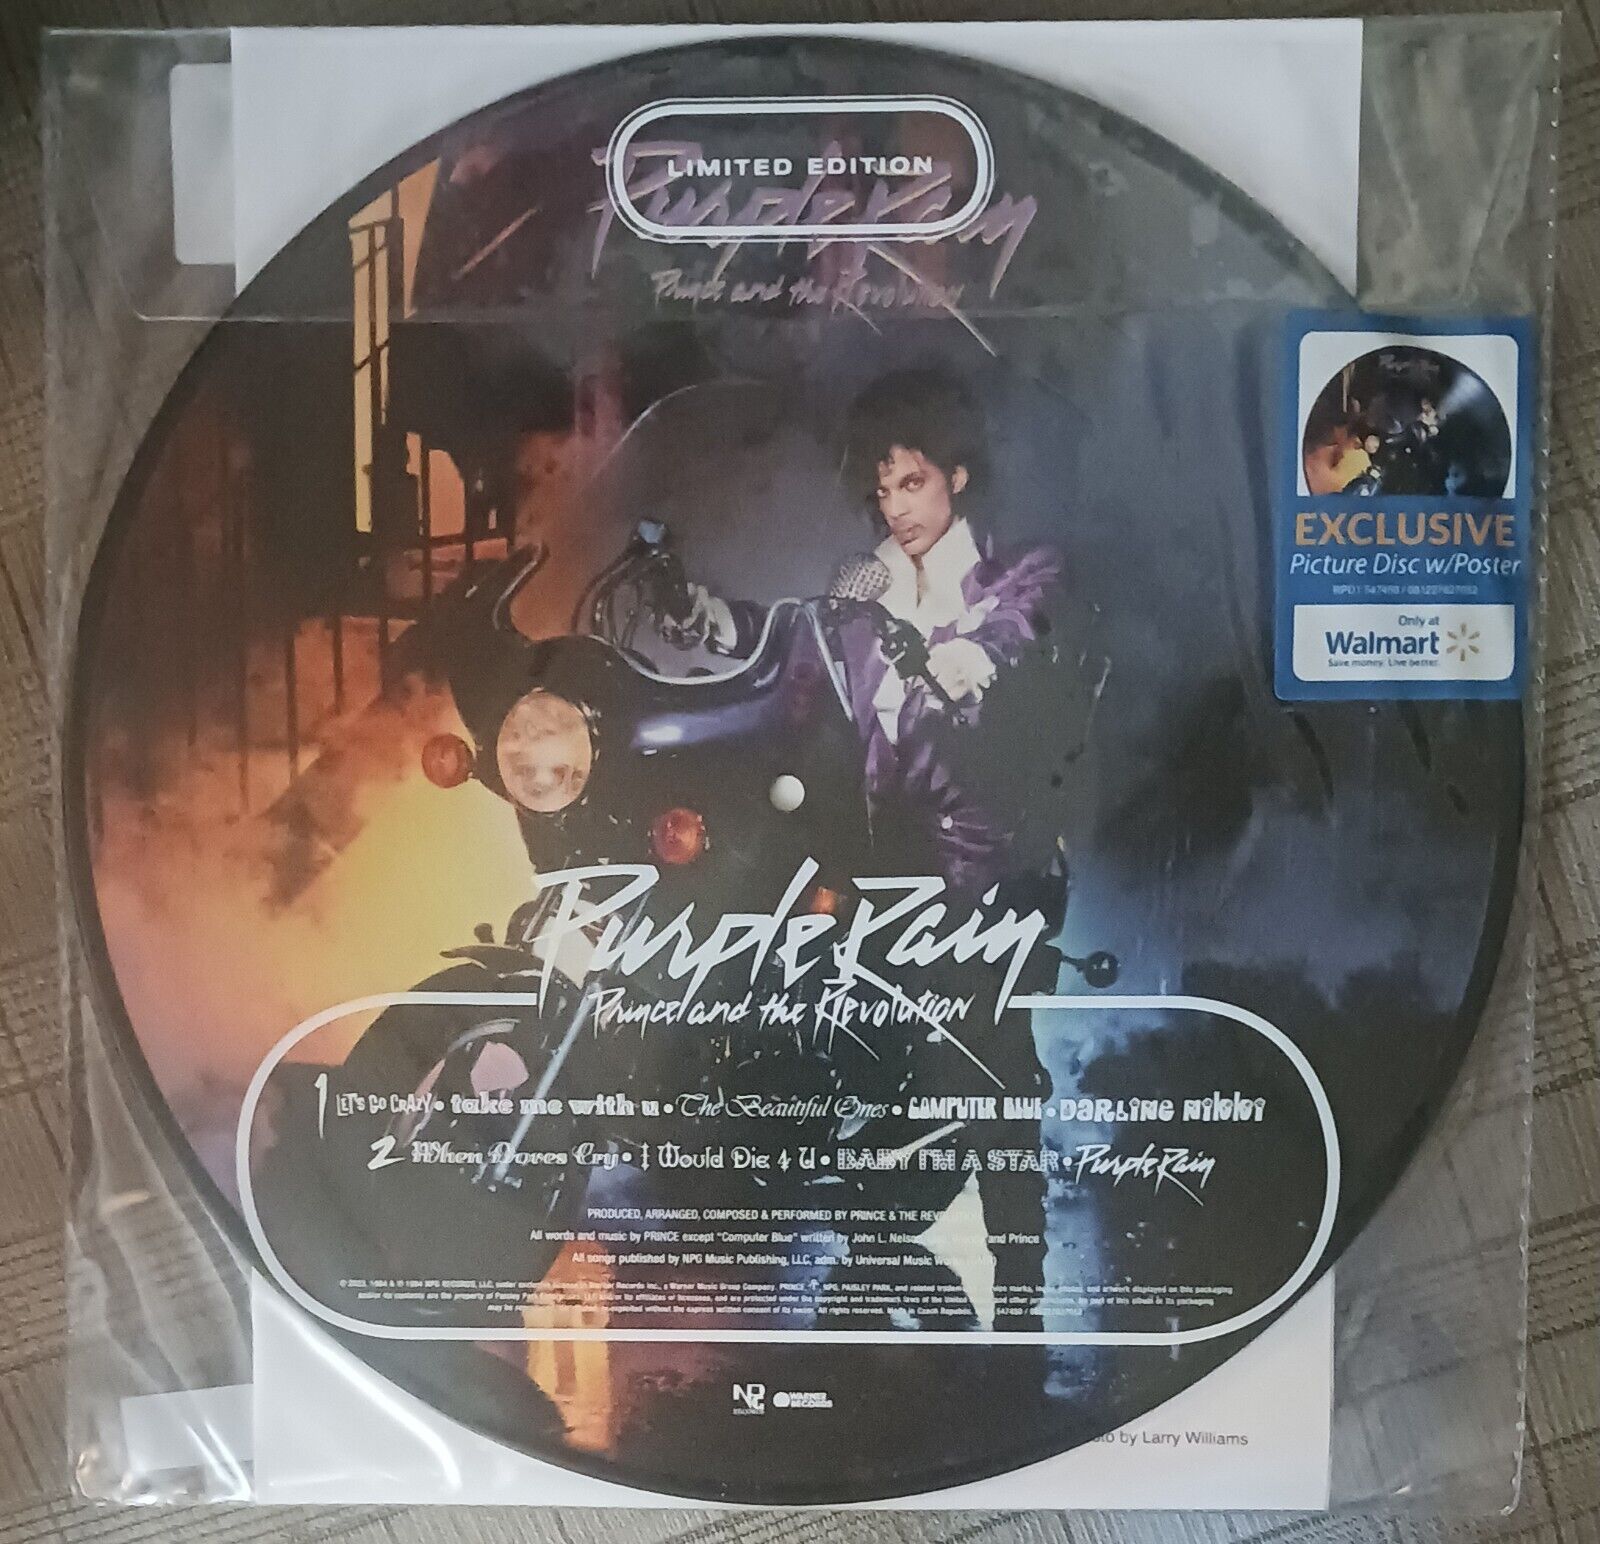 Prince and the Revolution Purple Rain Picture Disc w/Poster NEW Sealed LP